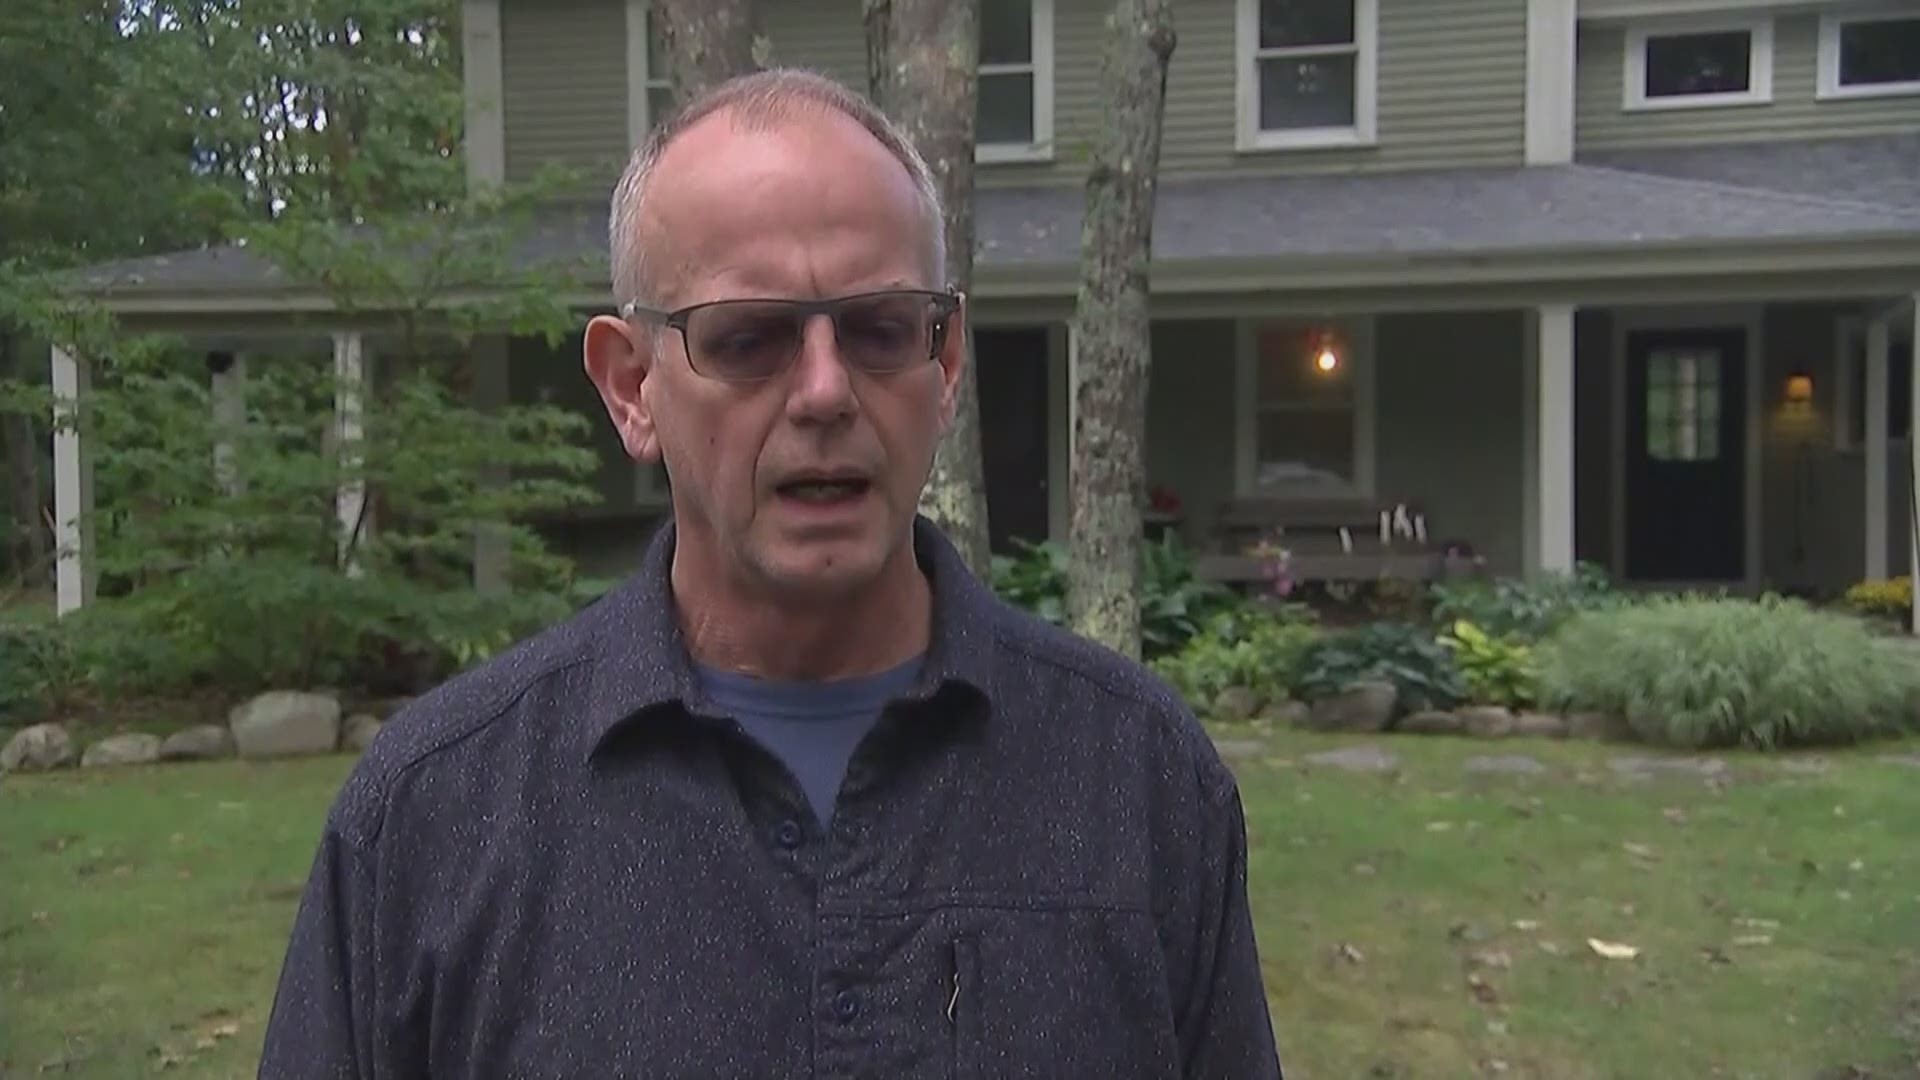 Interview: Husband of missing Maine woman speaks with NBC